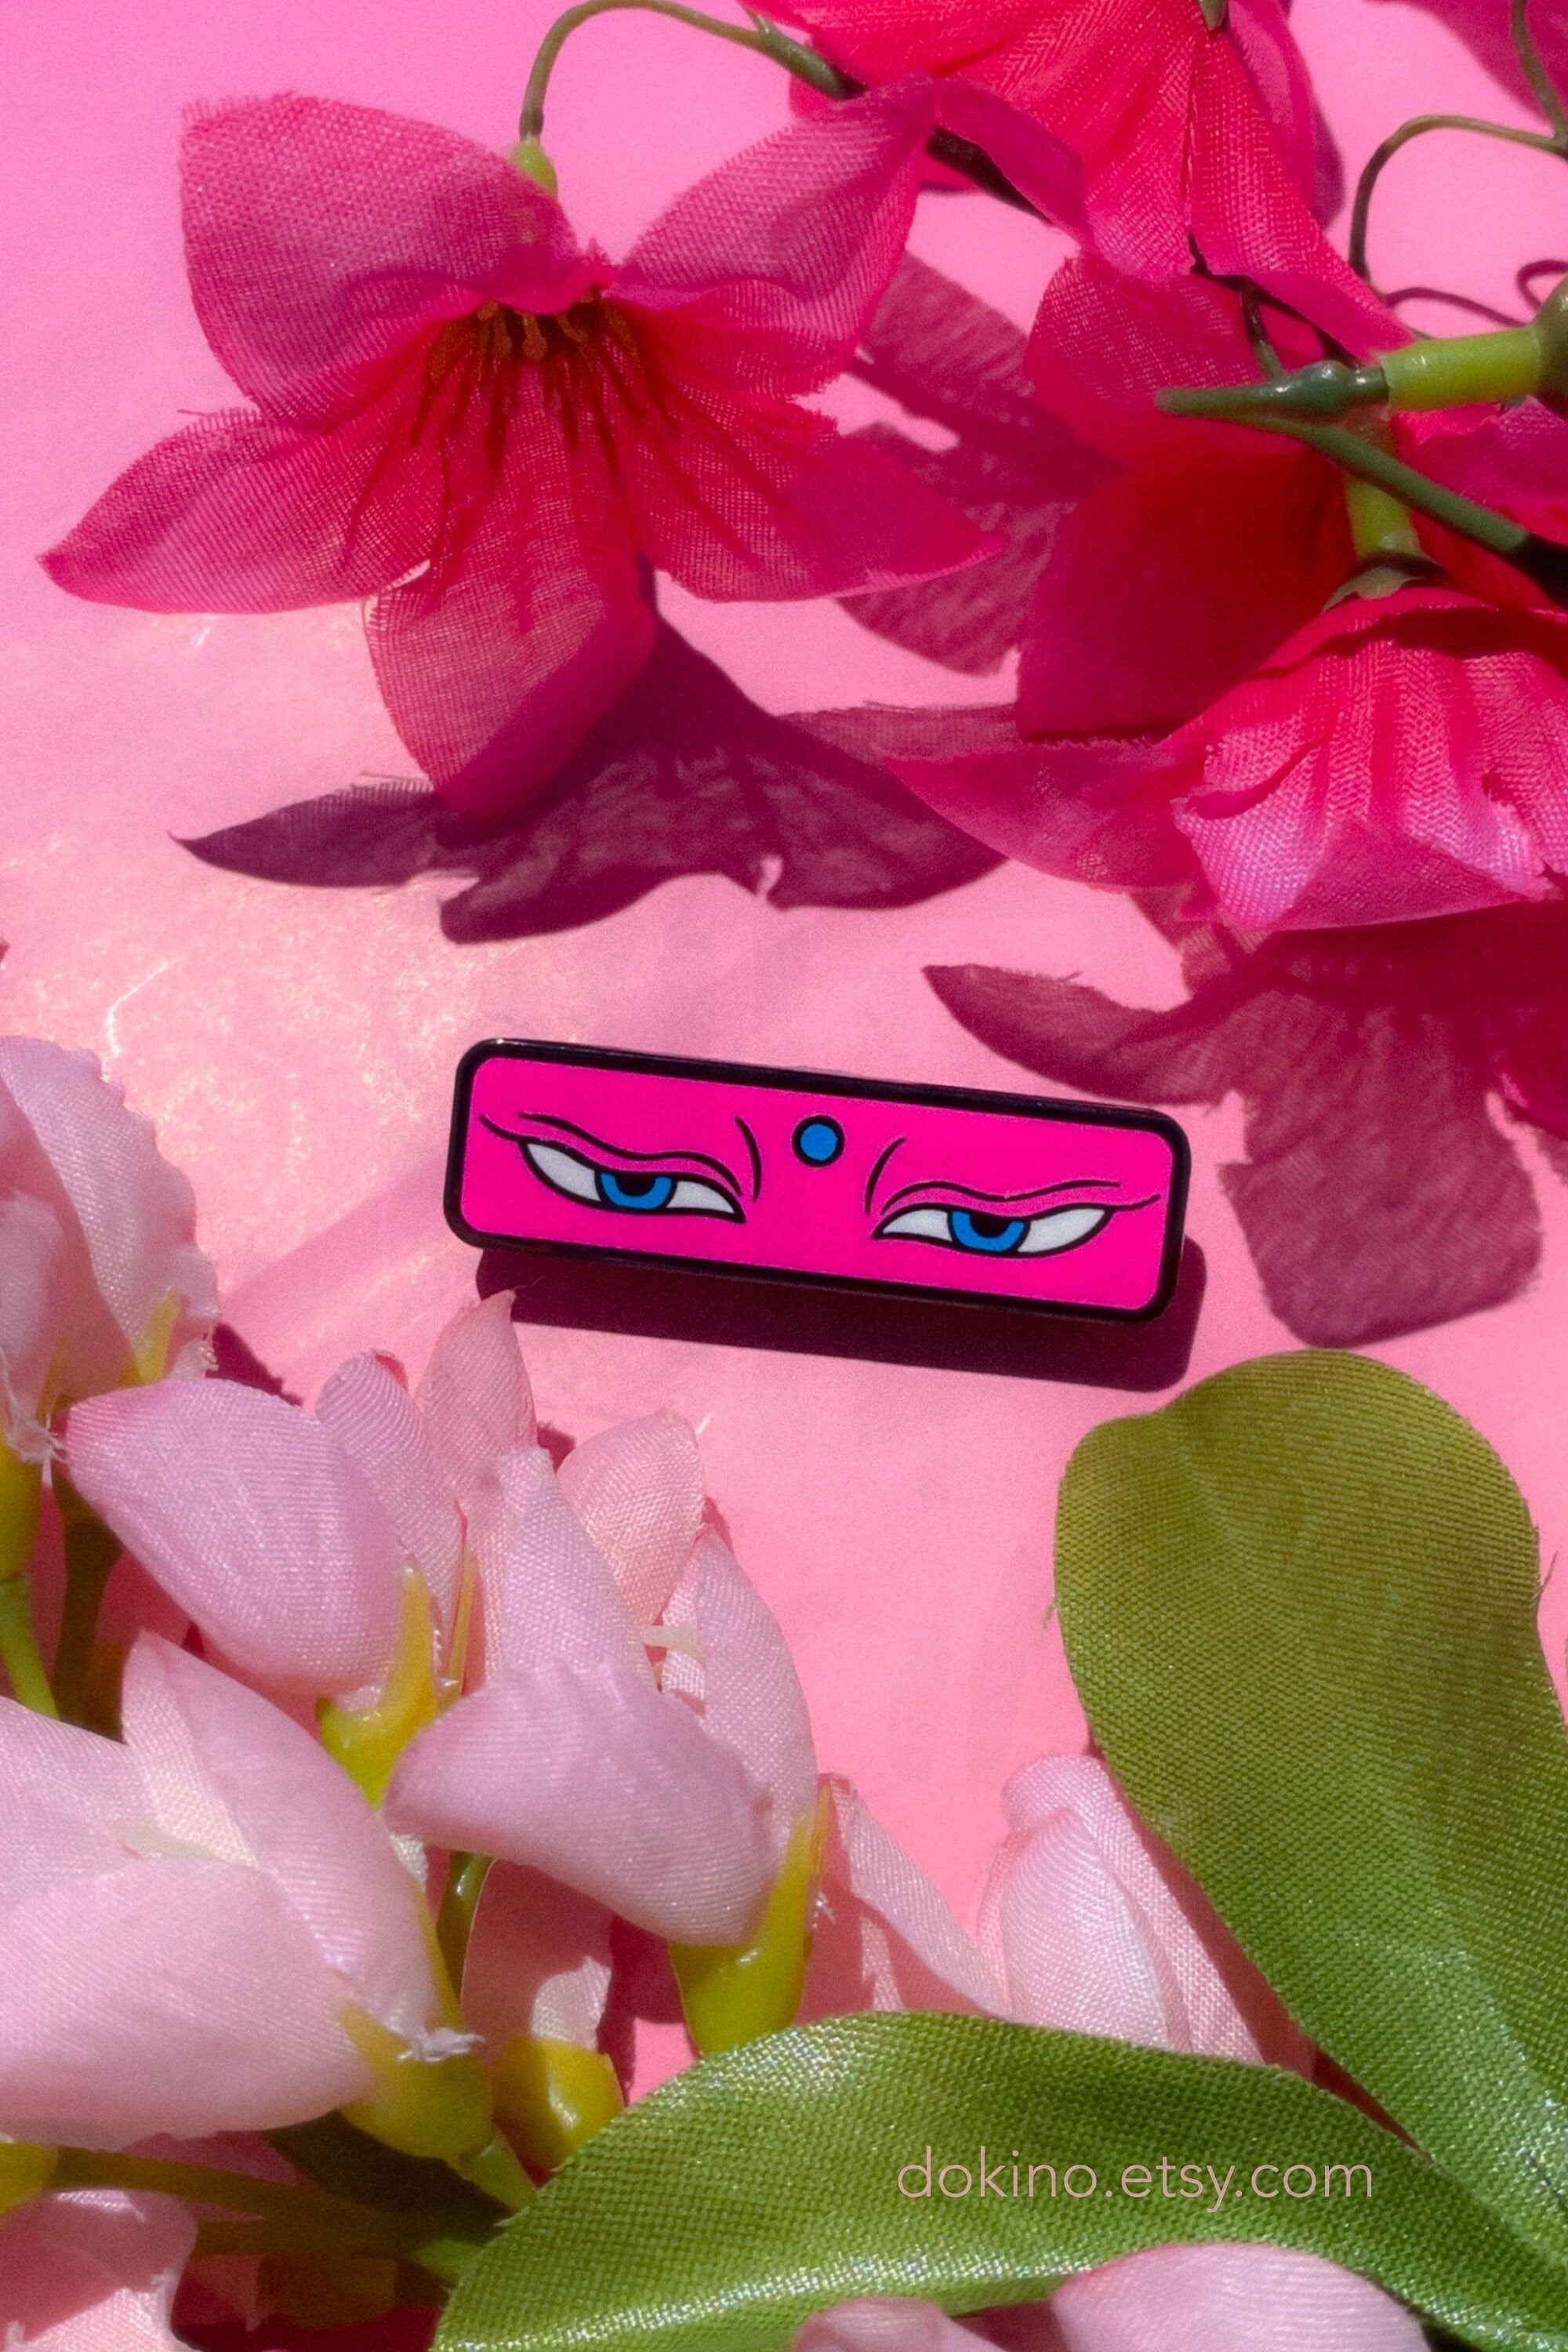 Pin em Aesthetic pink pictures